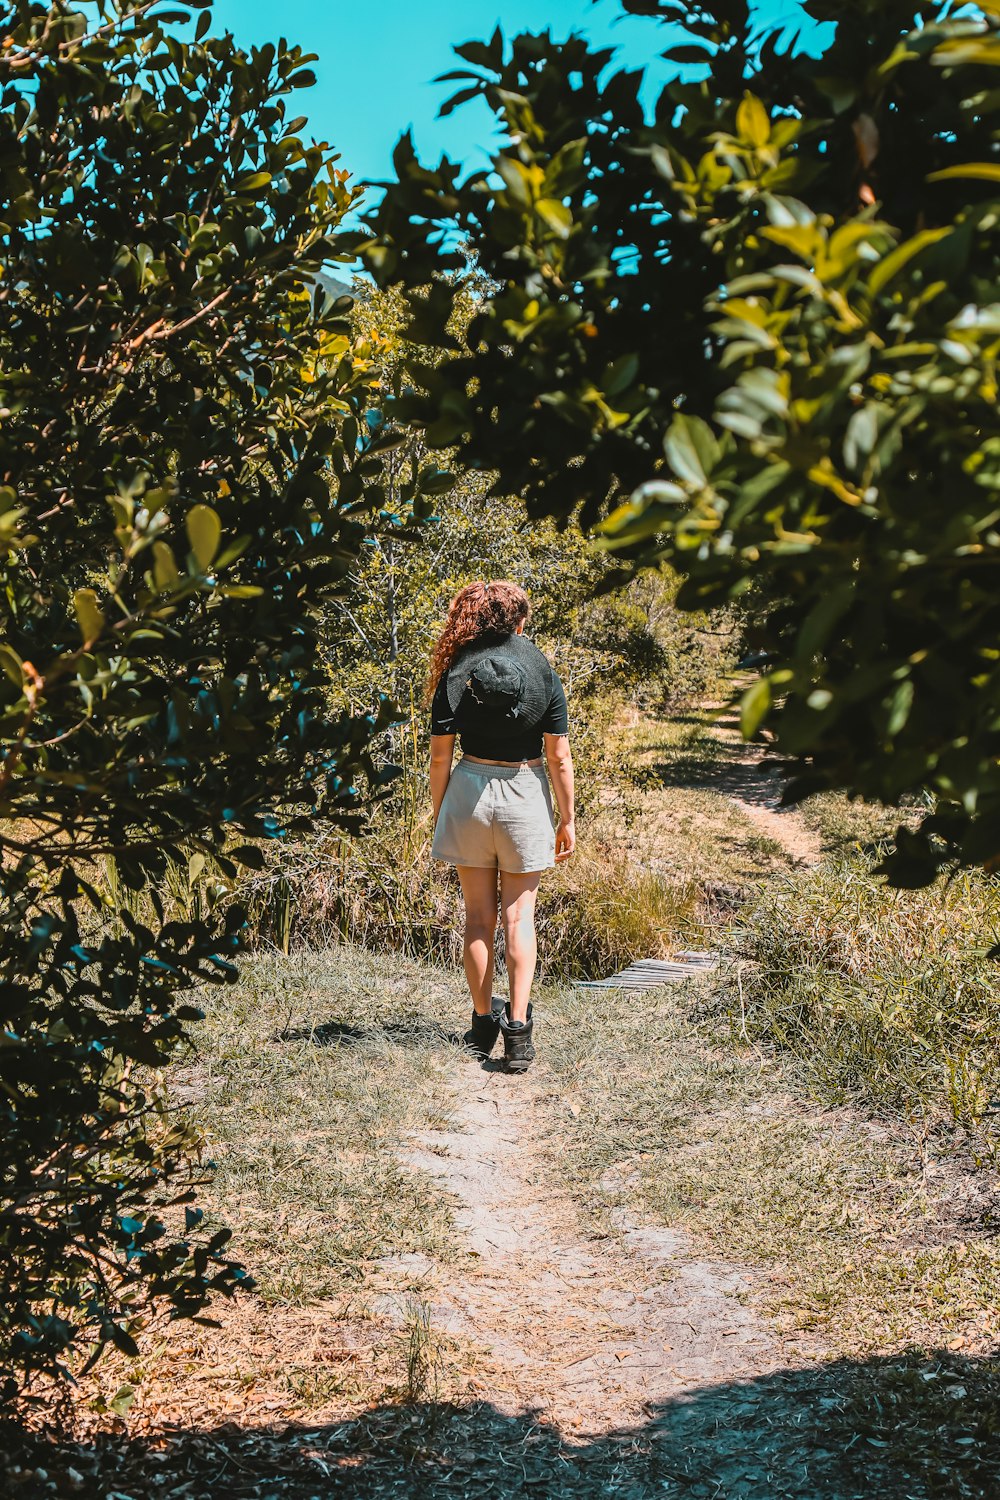 woman in black t-shirt walking on dirt pathway between green plants during daytime